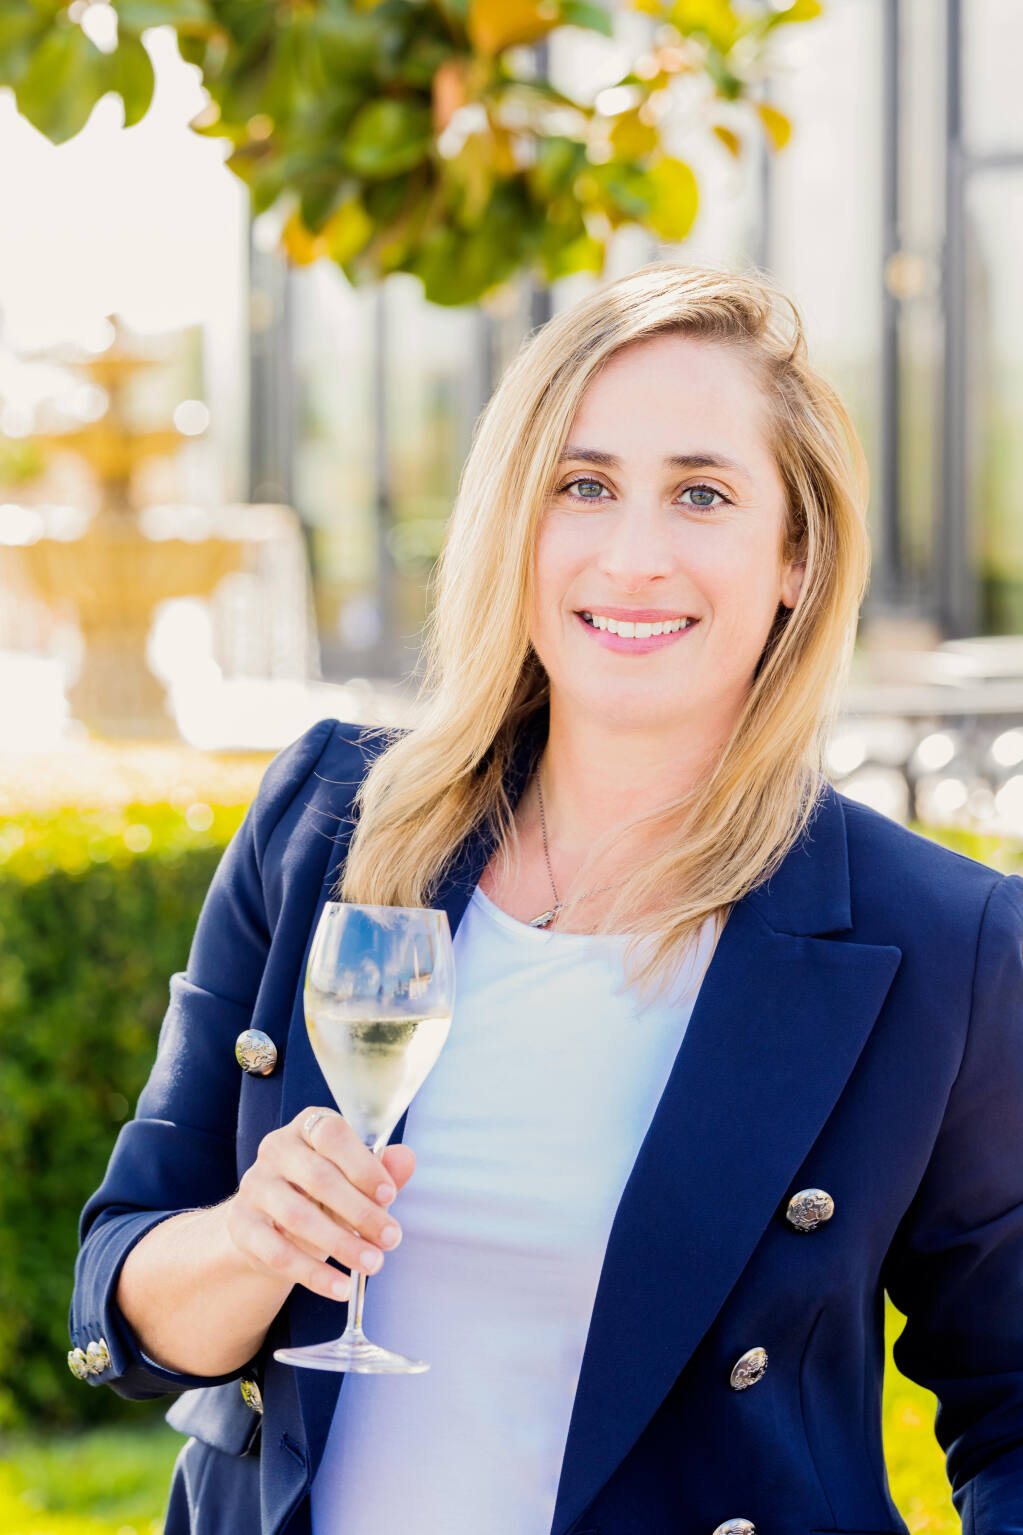 Remi Cohen is the CEO of Napa’s Domaine Carneros. If you want to break through the glass ceiling in the wine industry, Cohen has this advice: Know your worth.